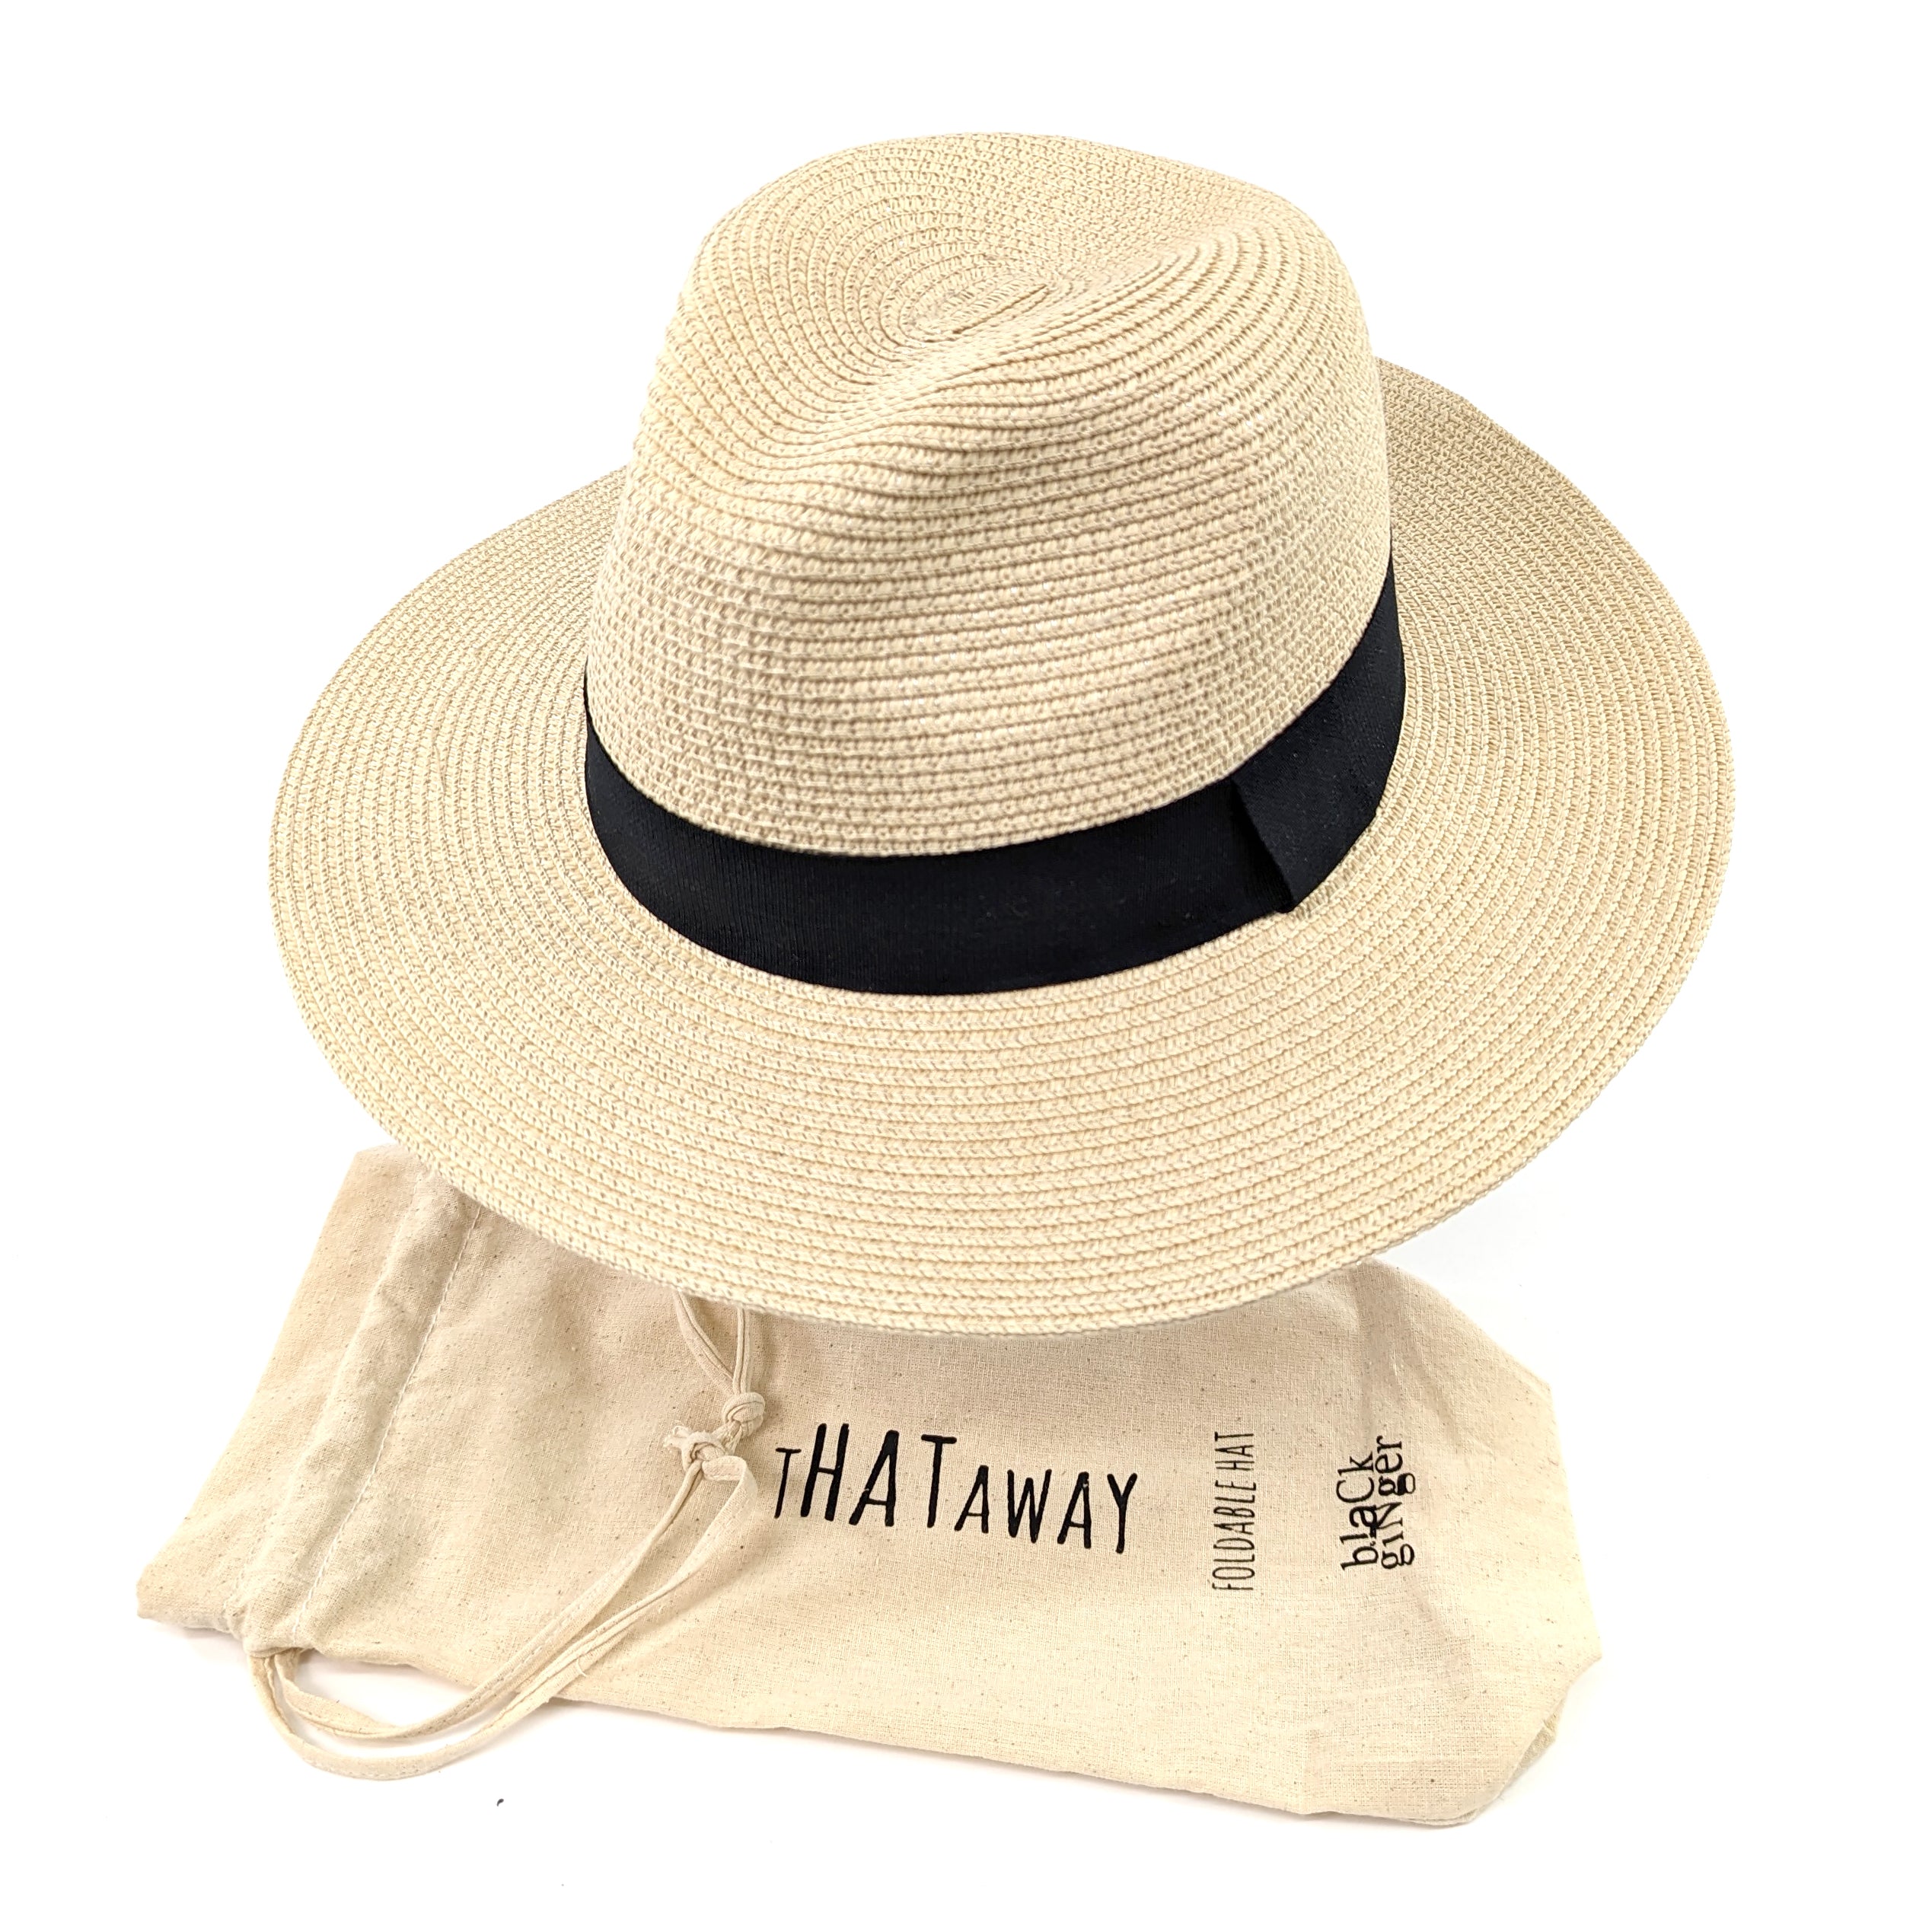 Foldable sun hat made of 100% paper straw sitting on a hat stand next to its travel bag. The hat has a 7cm brim for maximum sun protection, and the travel bag makes it easy to pack and take on the go.  59cm inner hat size